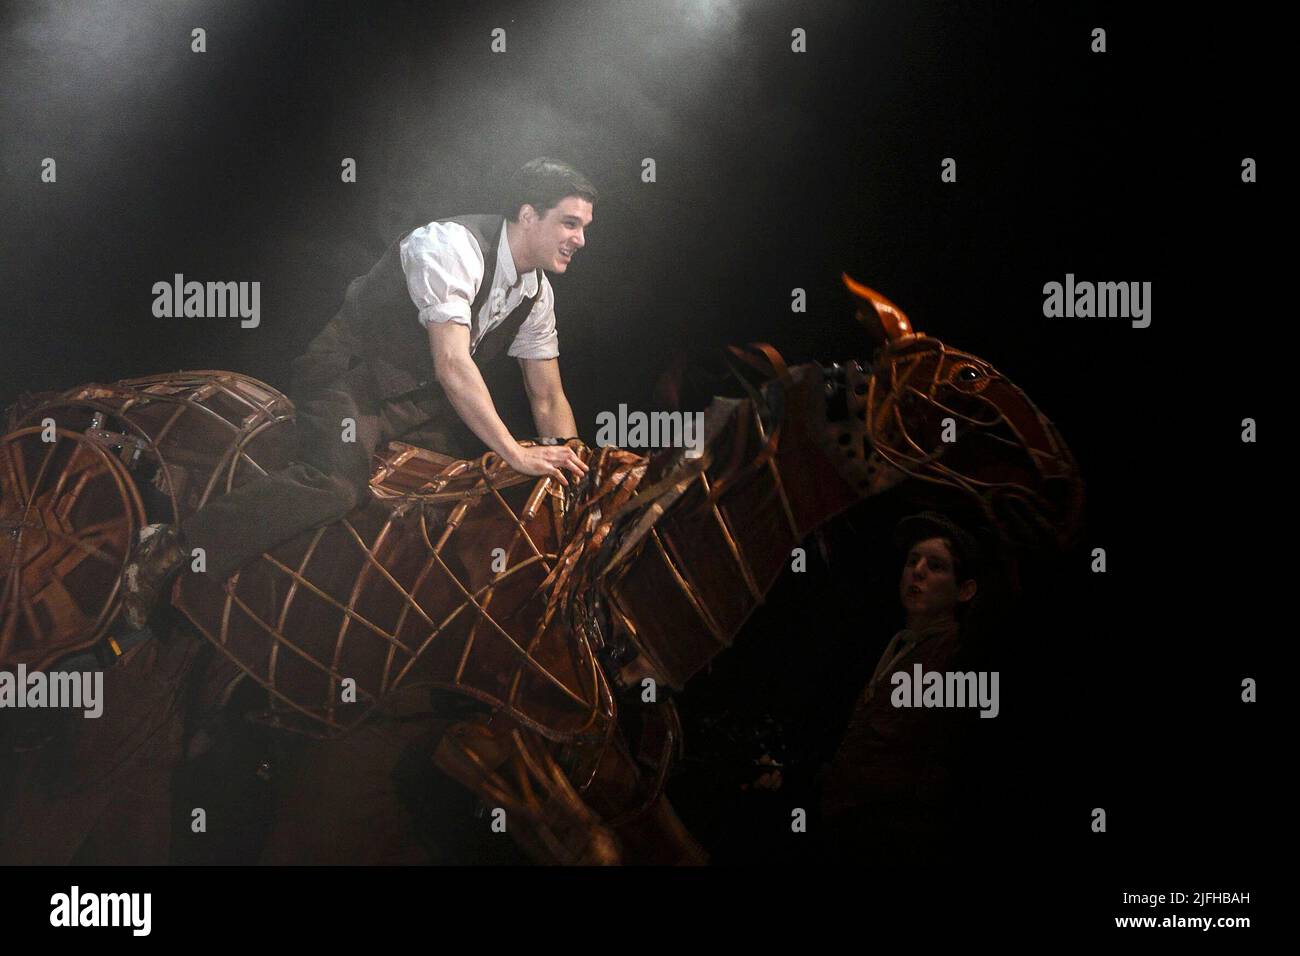 Kit Harington (Albert Narracott) in WAR HORSE at the New London Theatre, London WC2  03/04/2009  based on the novel by Michael Morpurgo  adapted by Nick Stafford  a National Theatre production in association with Handspring Puppet Company  set design: Rae Smith  puppet design and fabrication: Adrian Kohler  lighting: Paul Constable  movement & choreography: Toby Sedgwick  directors: Marianne Elliott & Tom Morris Stock Photo